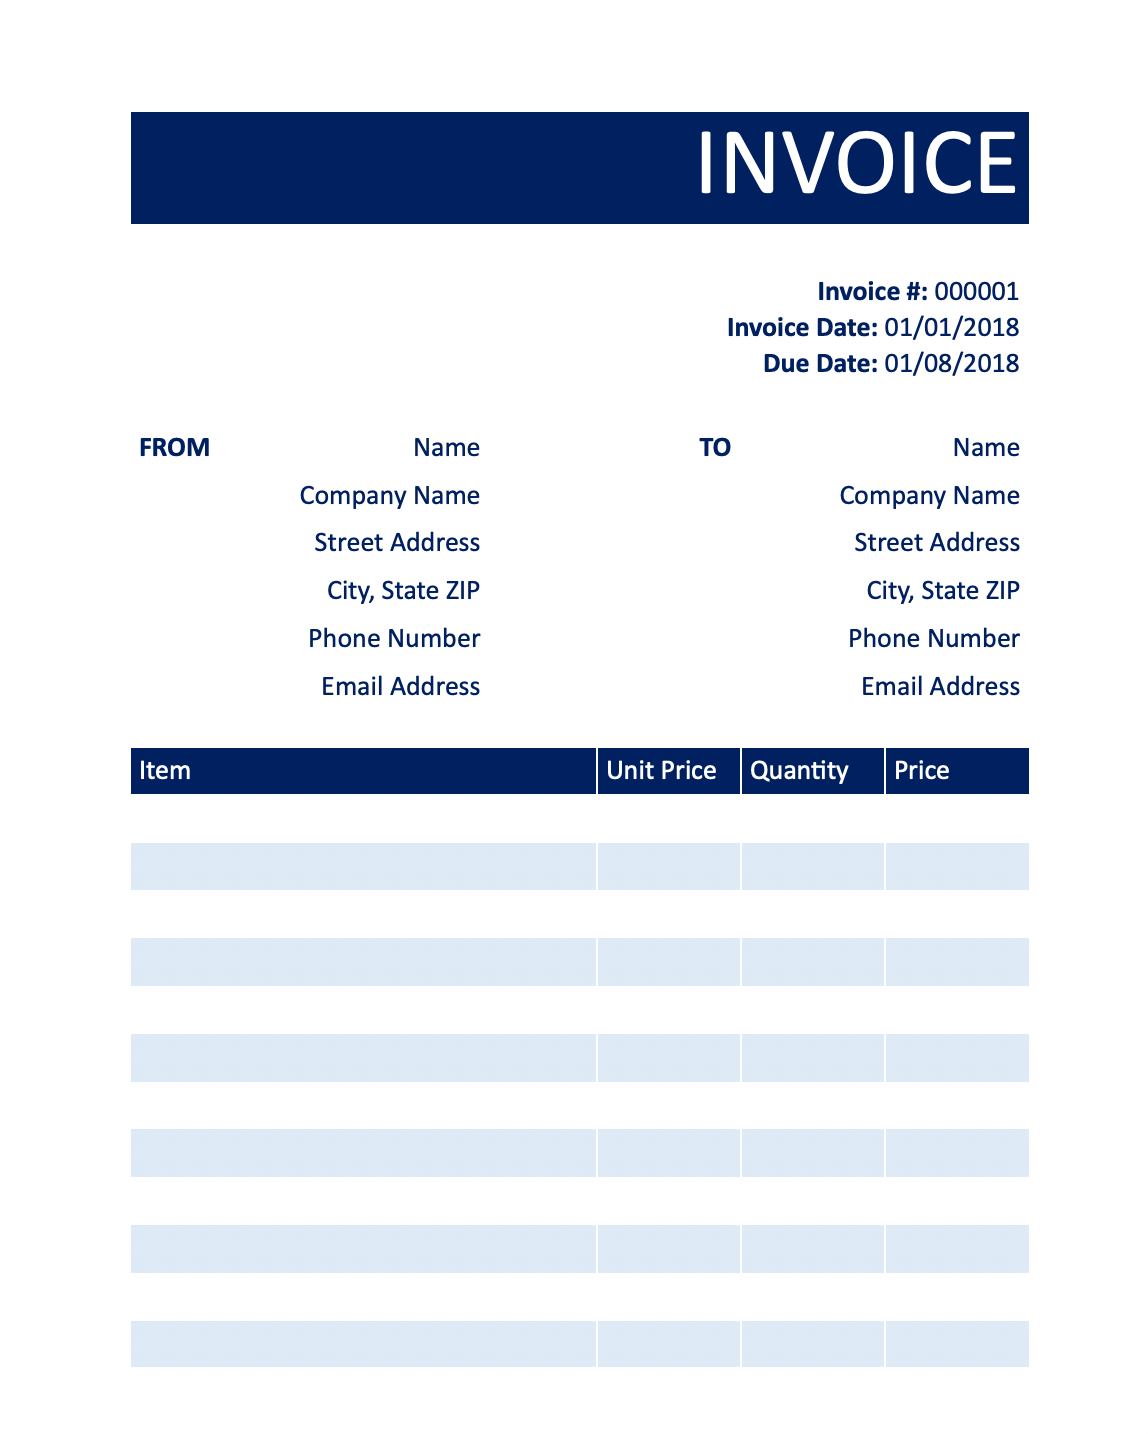 Blank Invoice Template - Step by Step Overview [Free Download]